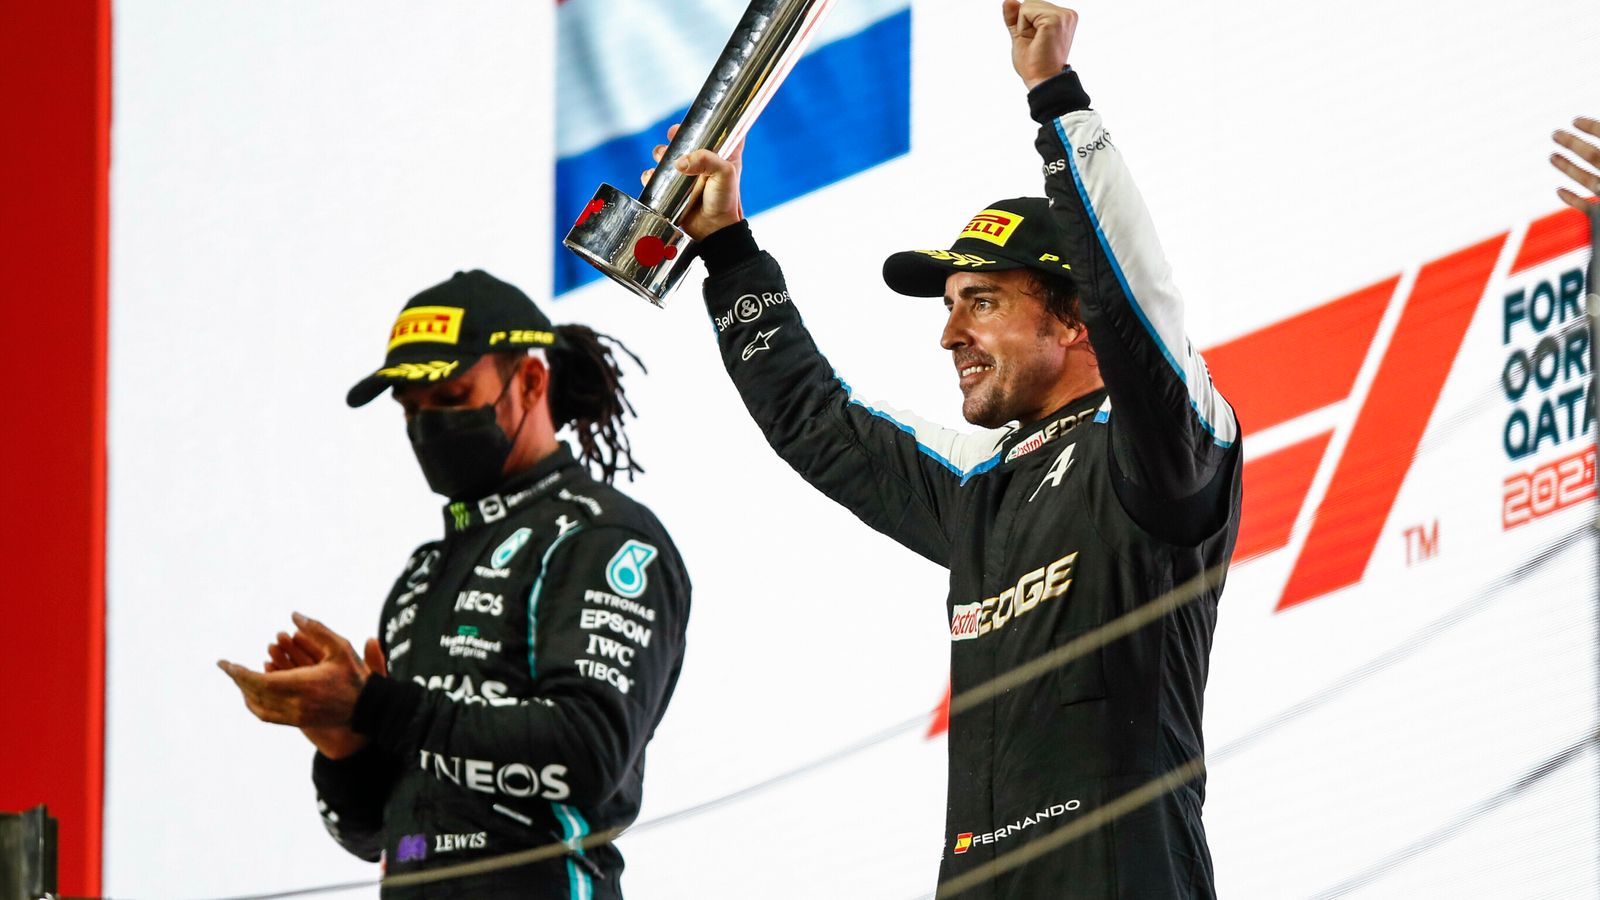 Fernando Alonso open to moving teams to win third Formula One world title